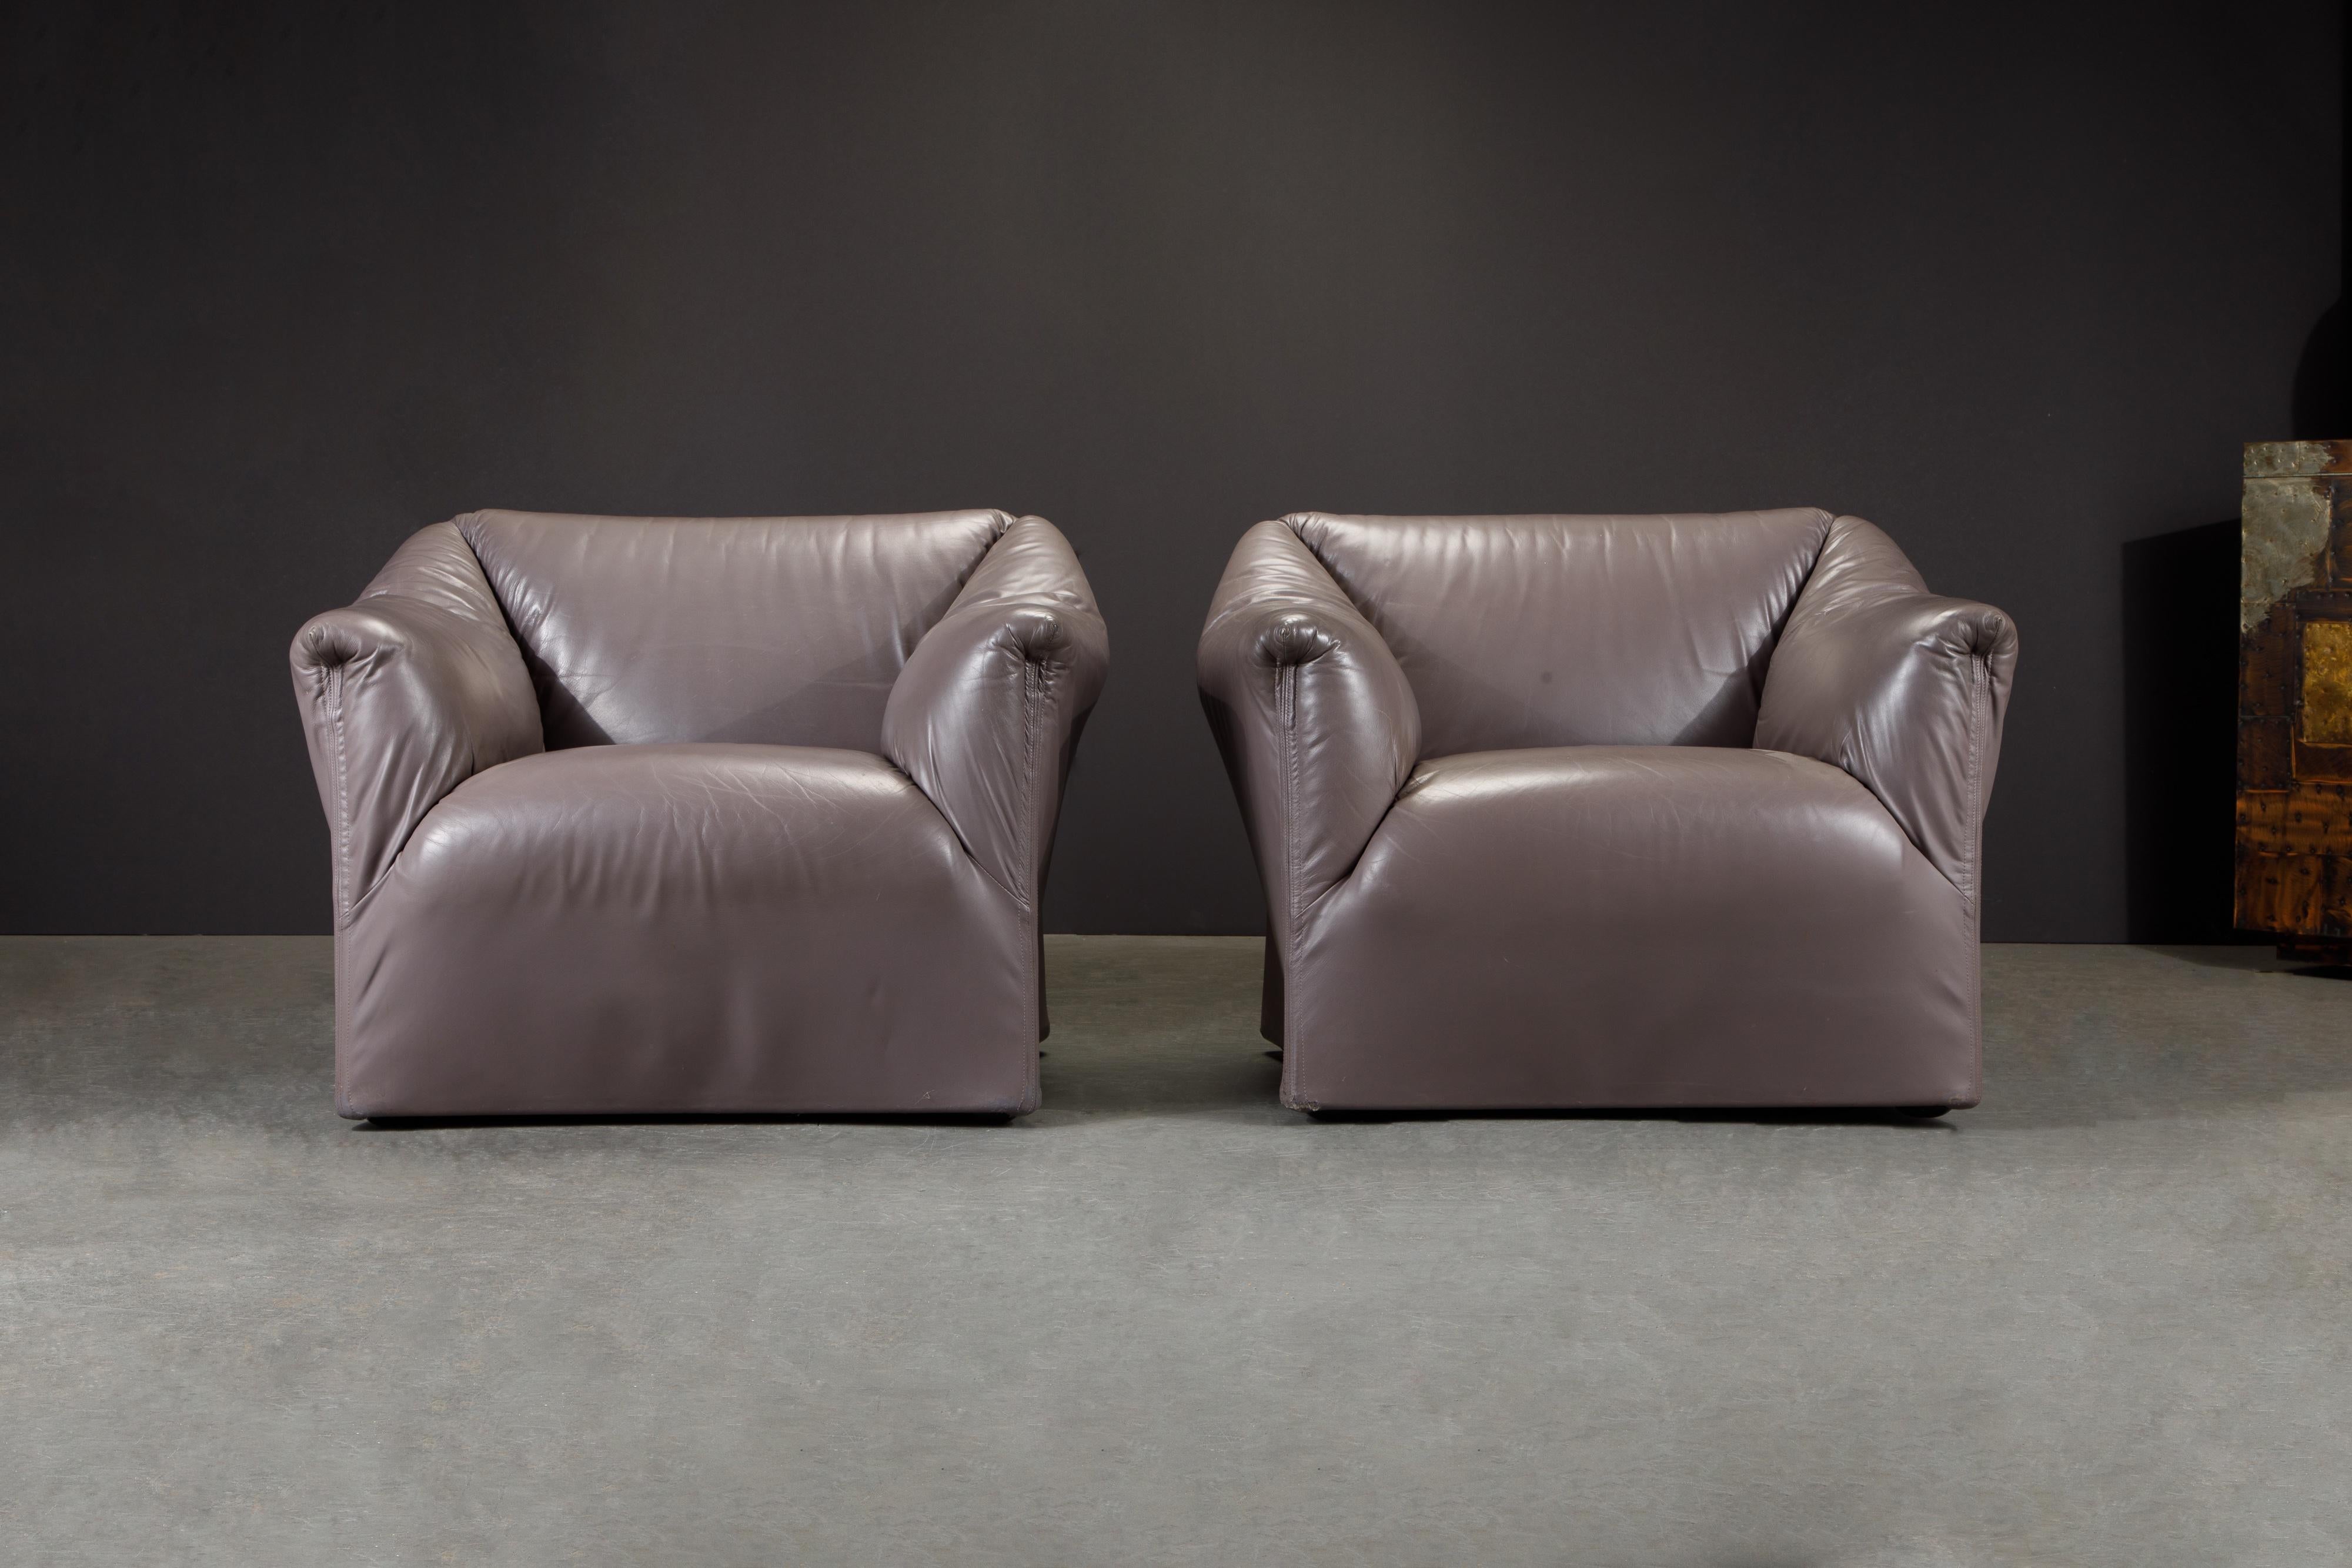 A beautiful pair of Mario Bellini for Cassina 'Tentazione' club chairs in a gorgeous deep colored leather. Priced as a pair, these model 685 lounge chairs were distributed by Atelier International, who were the US distributors for Cassina in the